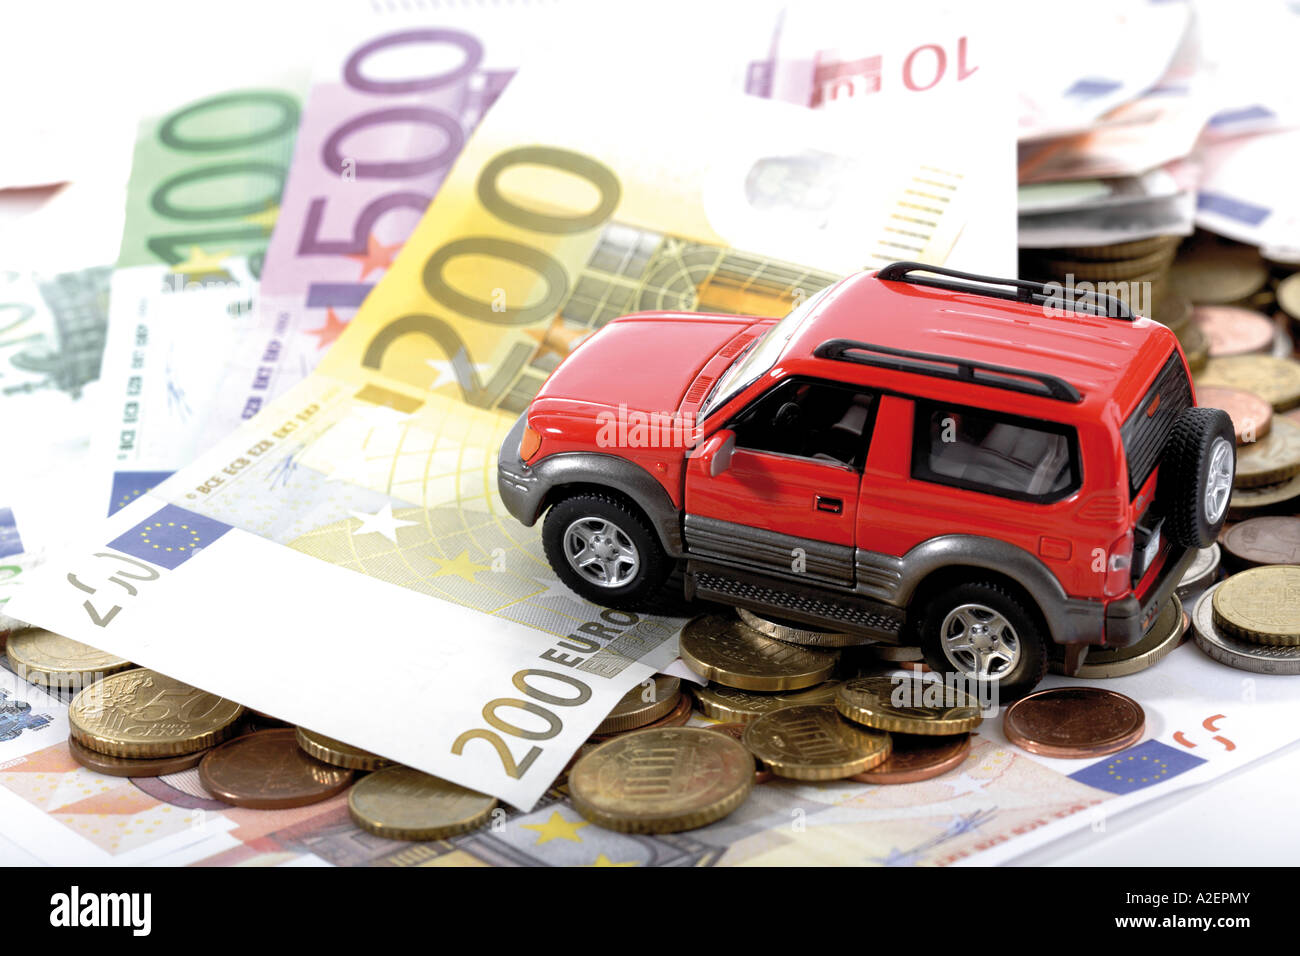 Toy car on Euro notes and coins Stock Photo